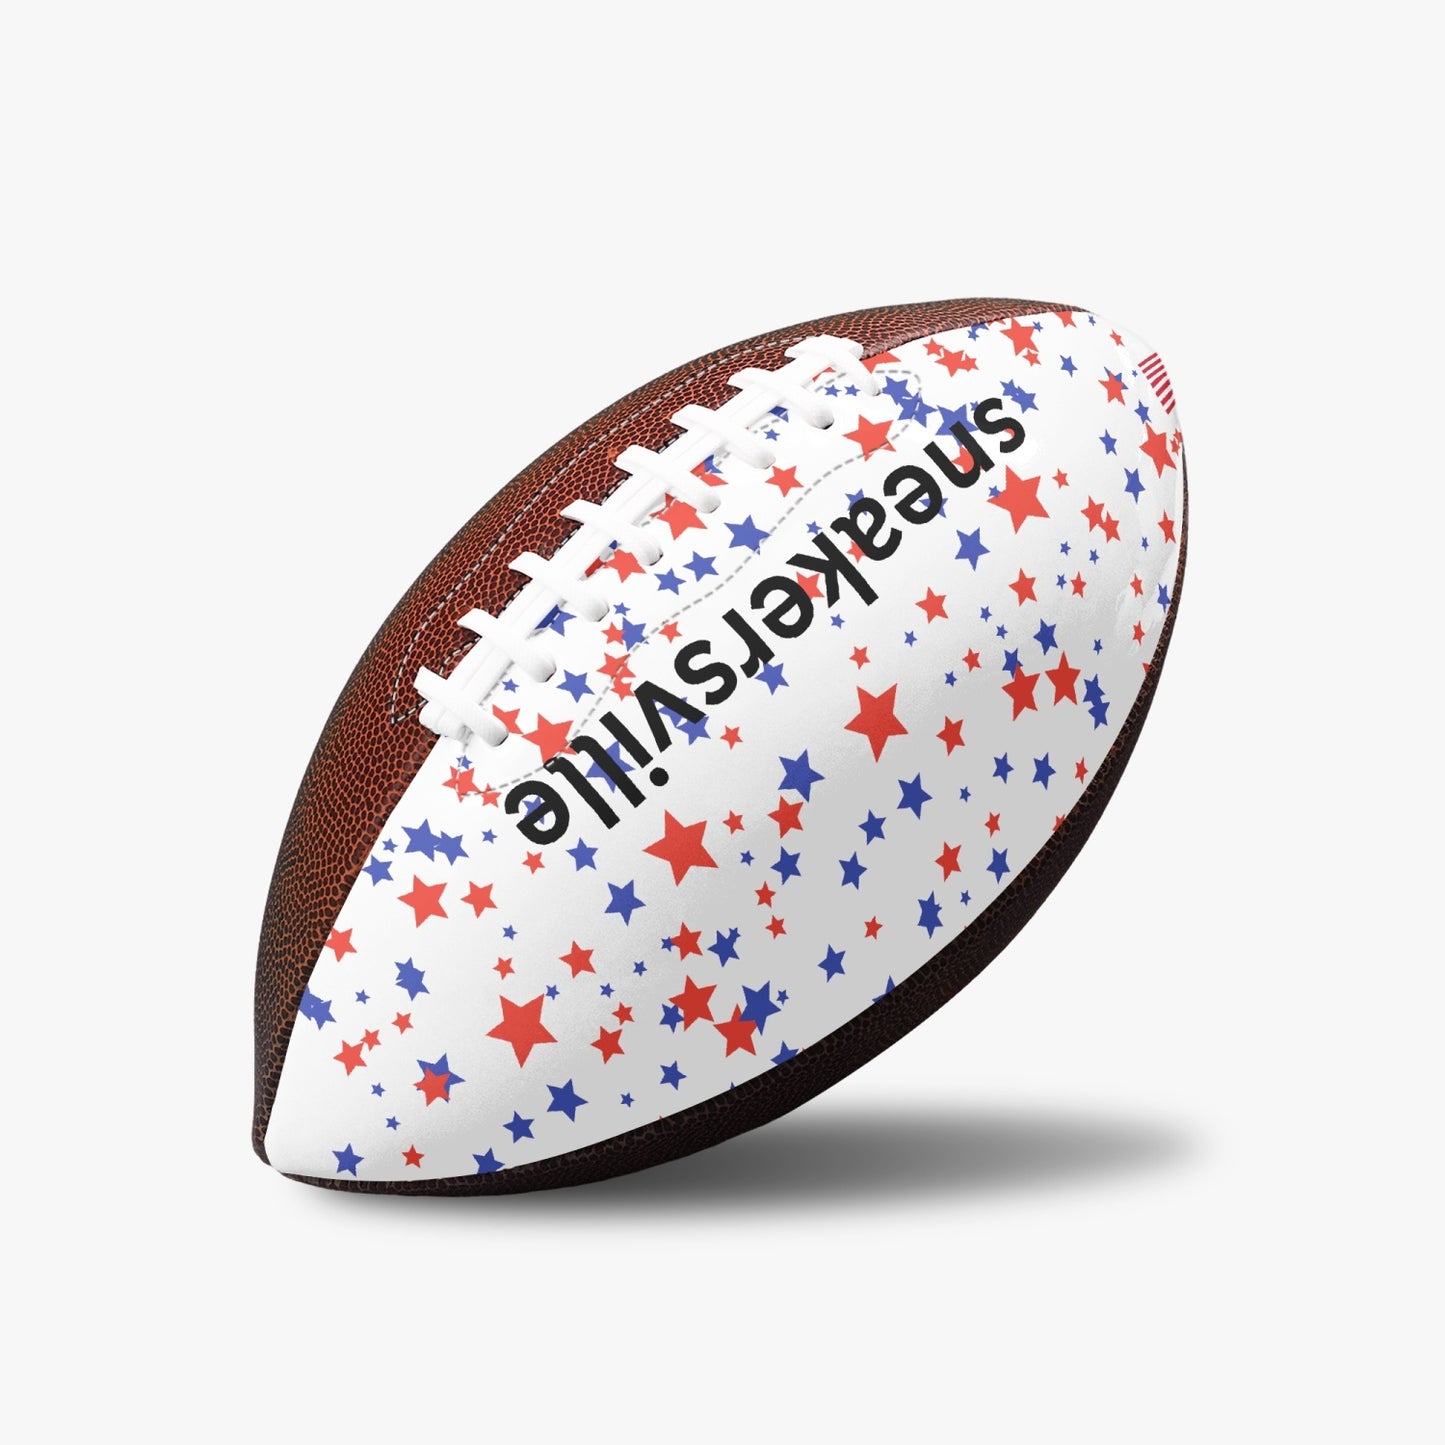 Official NFL size Football - USA Stars